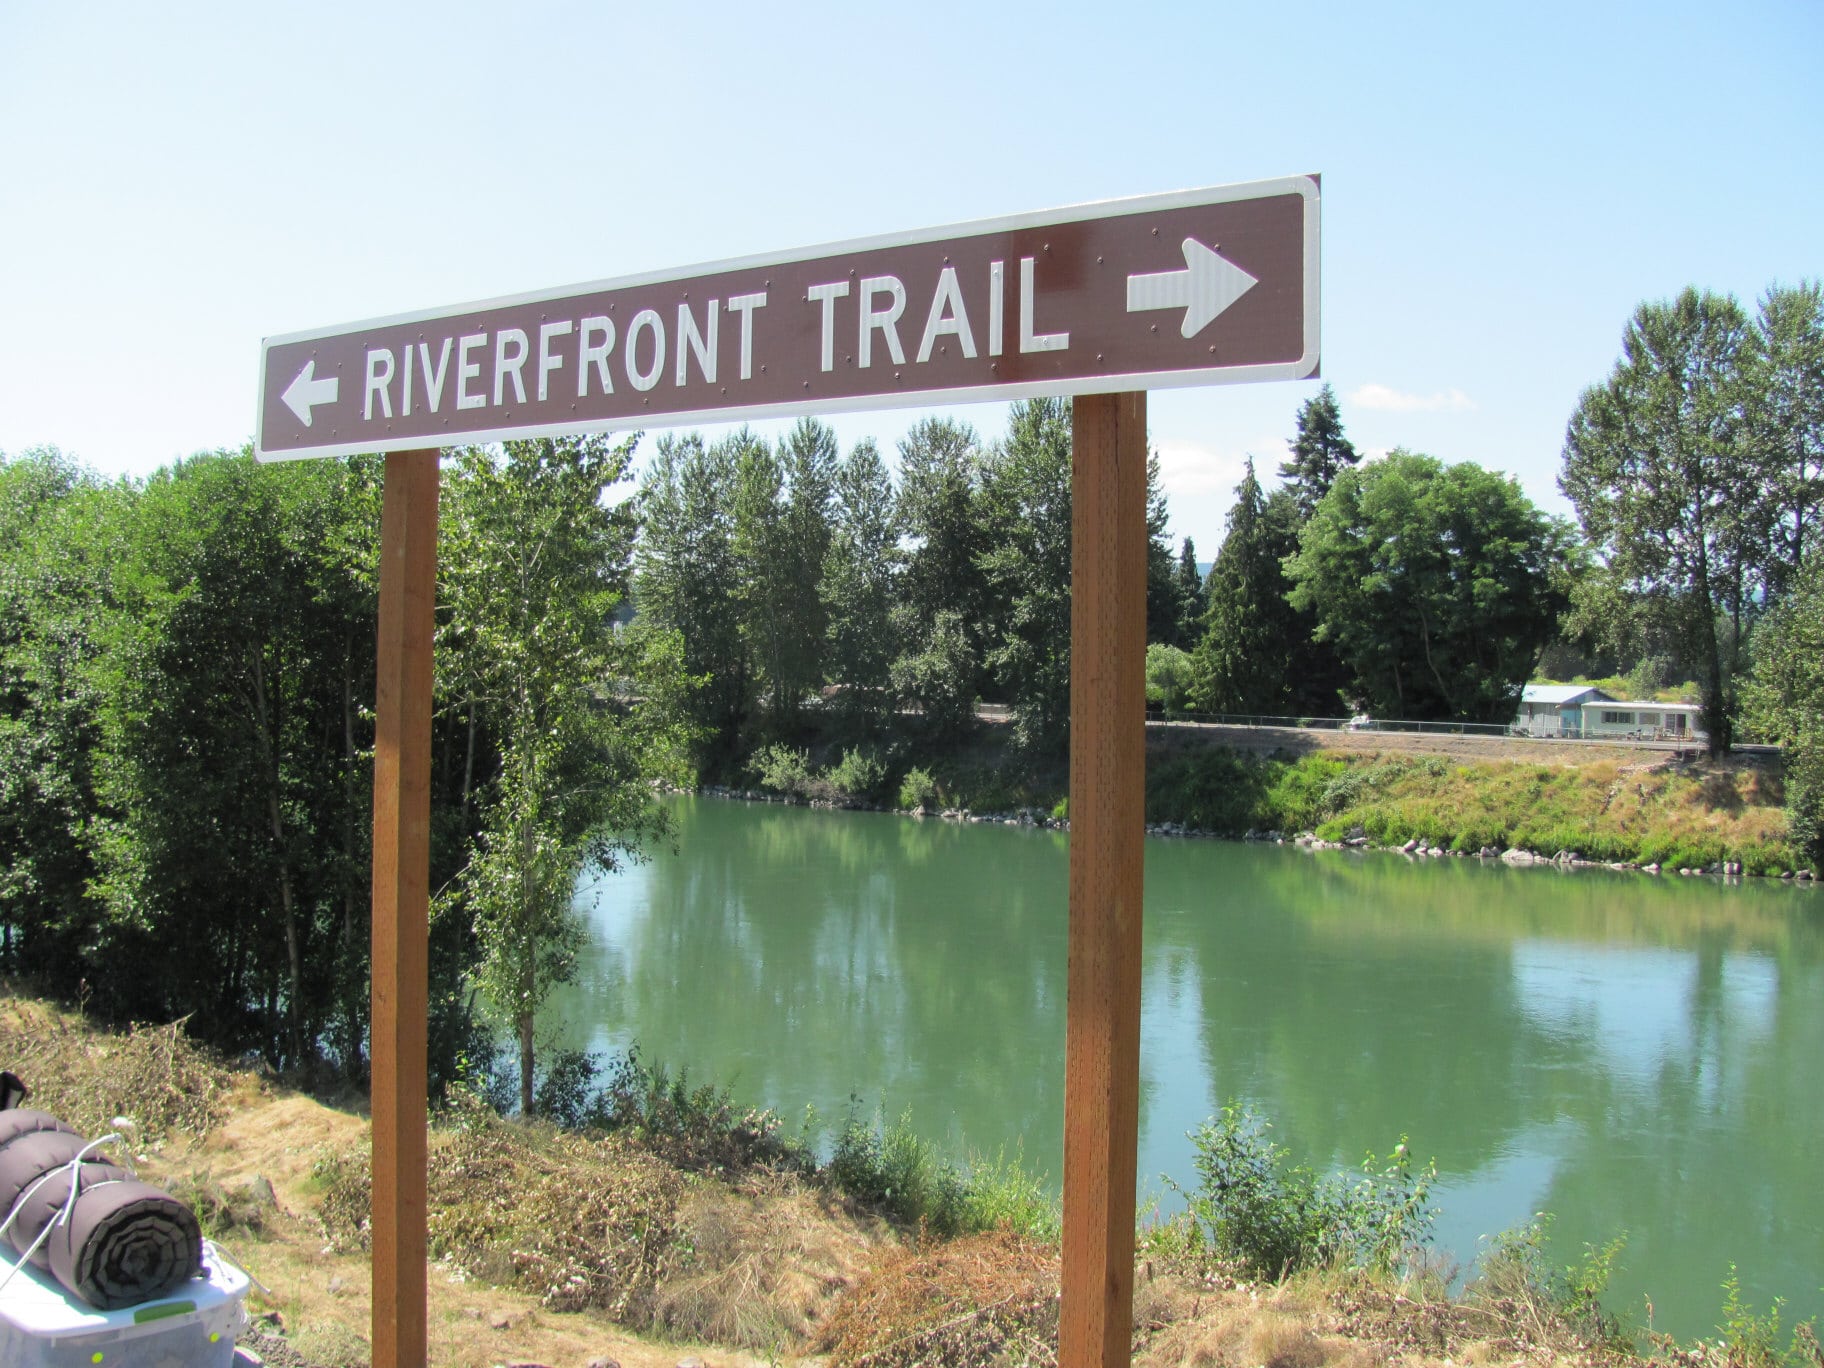 A sign proclaiming "Riverfront Trail" in front of a river.